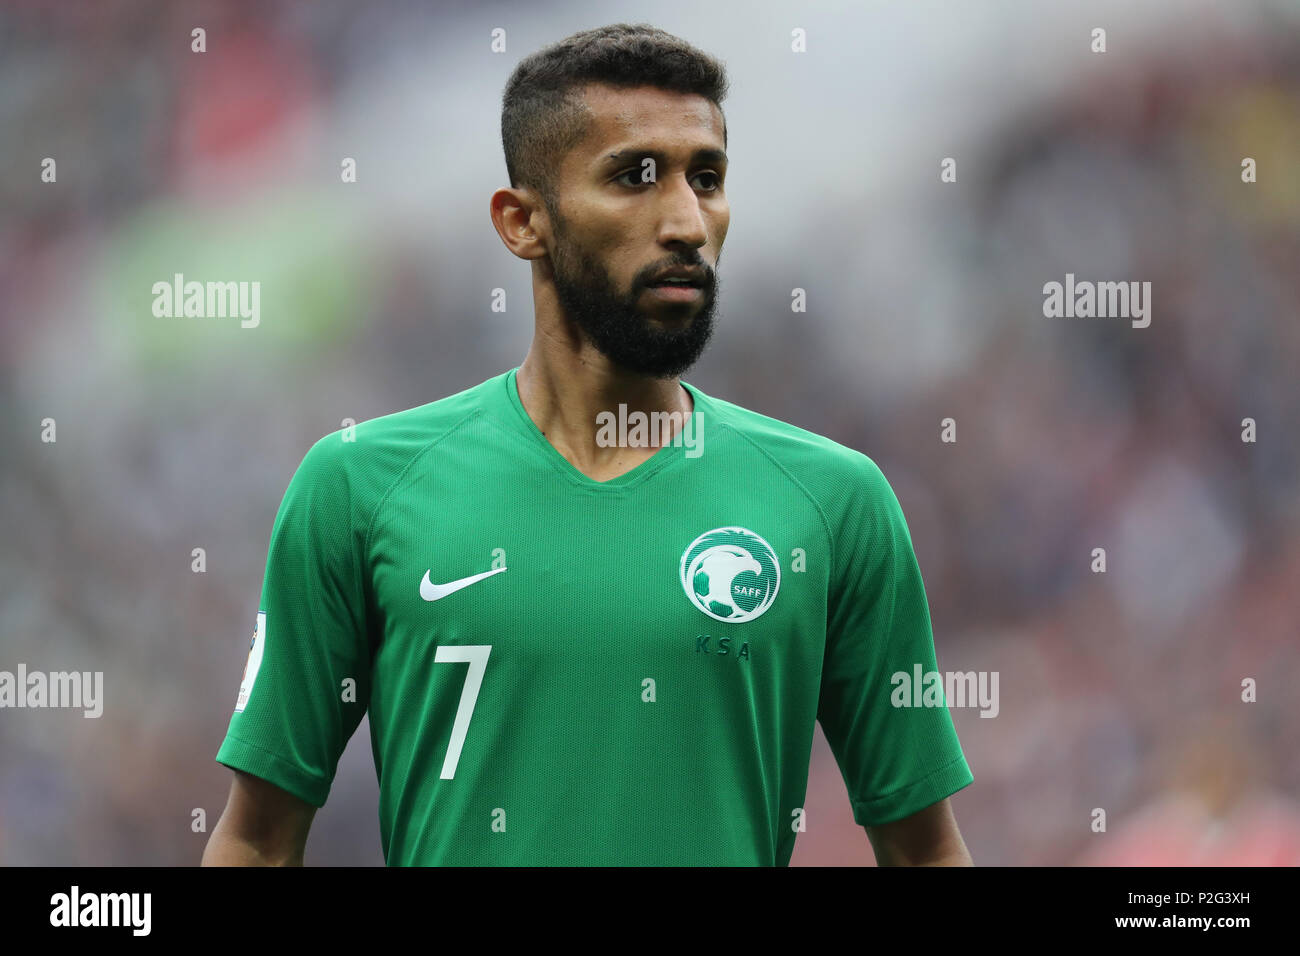 Salman Al-Faraj SAUDI ARABIA RUSSIA V SAUDI ARABIA, 2018 FIFA WORLD CUP RUSSIA 14 June 2018 GBC8041 Russia v Saudi Arabia 2018 FIFA World Cup Russia STRICTLY EDITORIAL USE ONLY. If The Player/Players Depicted In This Image Is/Are Playing For An English Club Or The England National Team. Then This Image May Only Be Used For Editorial Purposes. No Commercial Use. The Following Usages Are Also Restricted EVEN IF IN AN EDITORIAL CONTEXT: Use in conjuction with, or part of, any unauthorized audio, video, data, fixture lists, club/league logos, Betting, Games or any 'live' servic Stock Photo